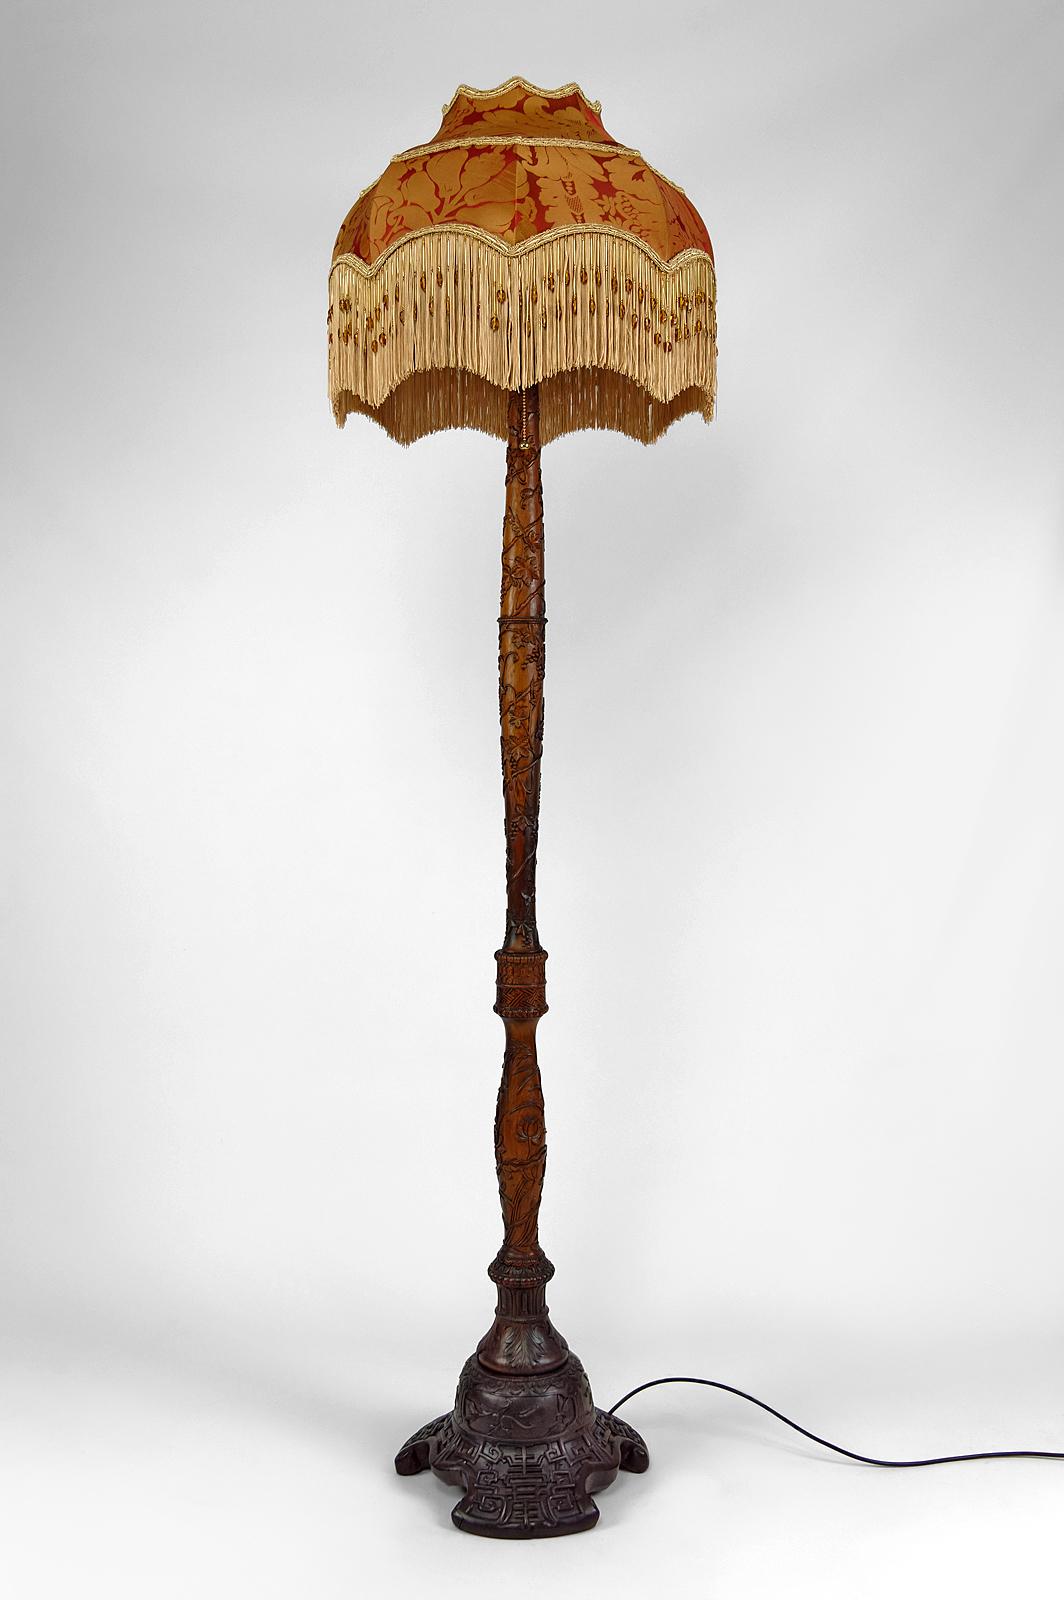 Vietnamese Antique Asian carved wooden floor lamp, Indochina or China, circa 1900